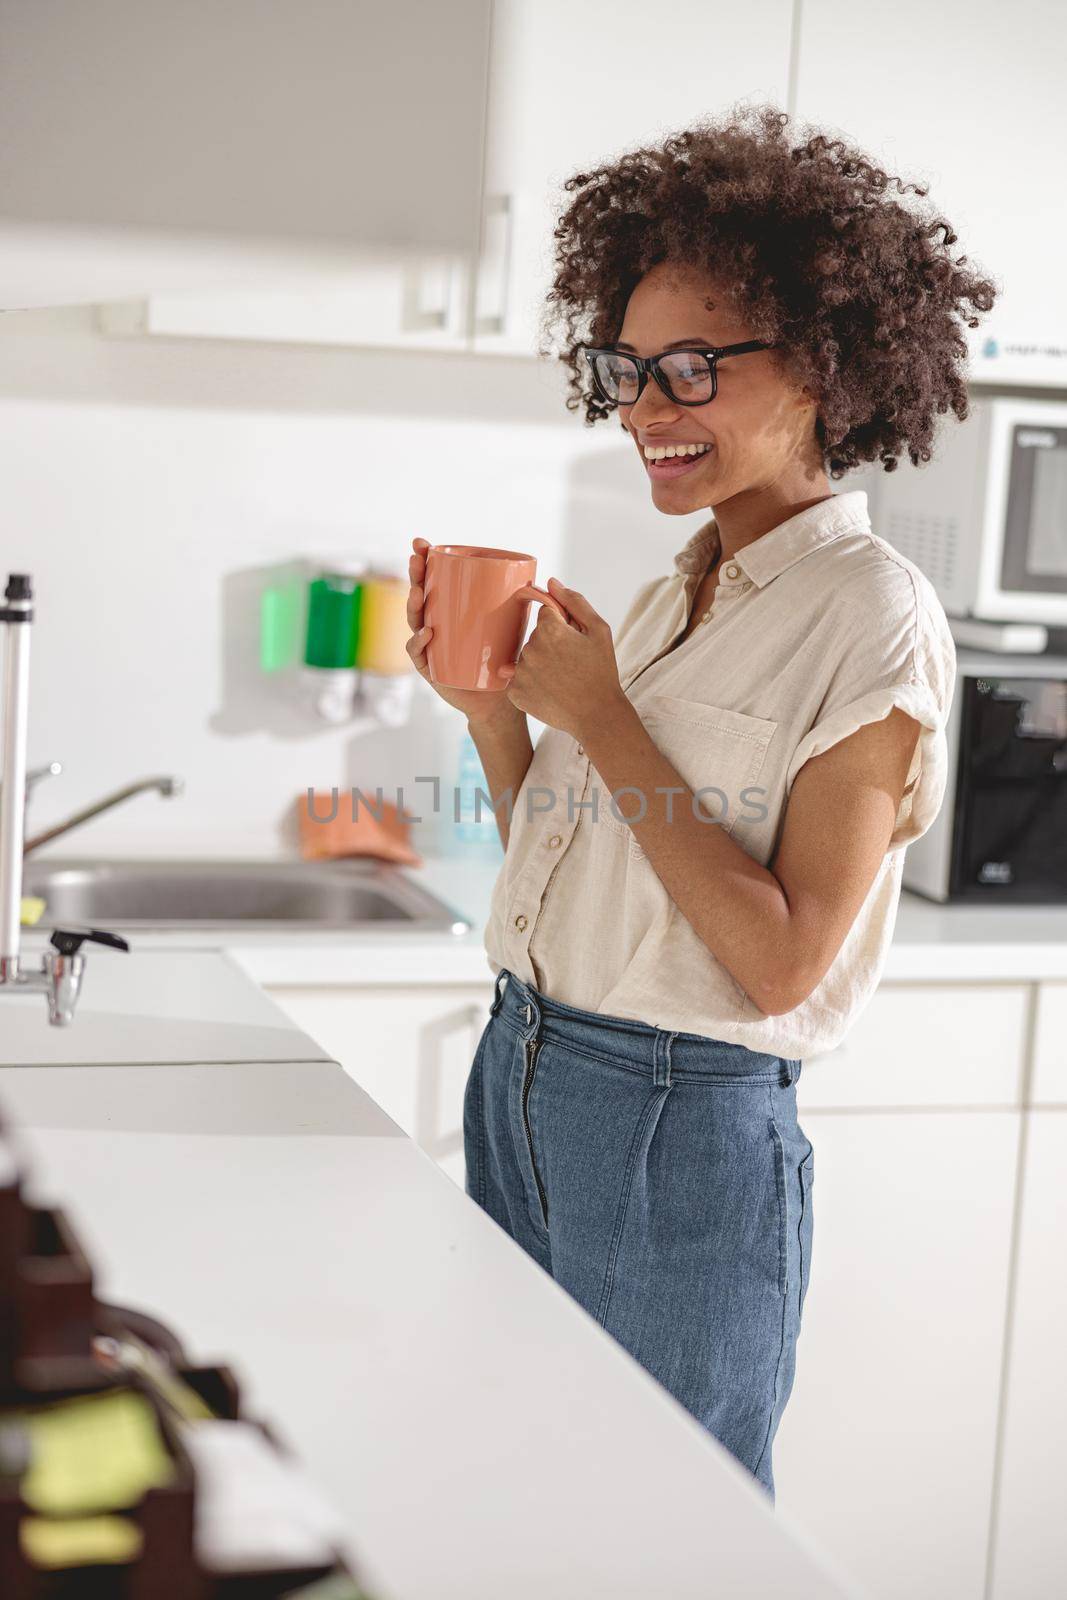 Happy multiethnic woman in glasses standing and holding cup of coffee on coworking kitchen